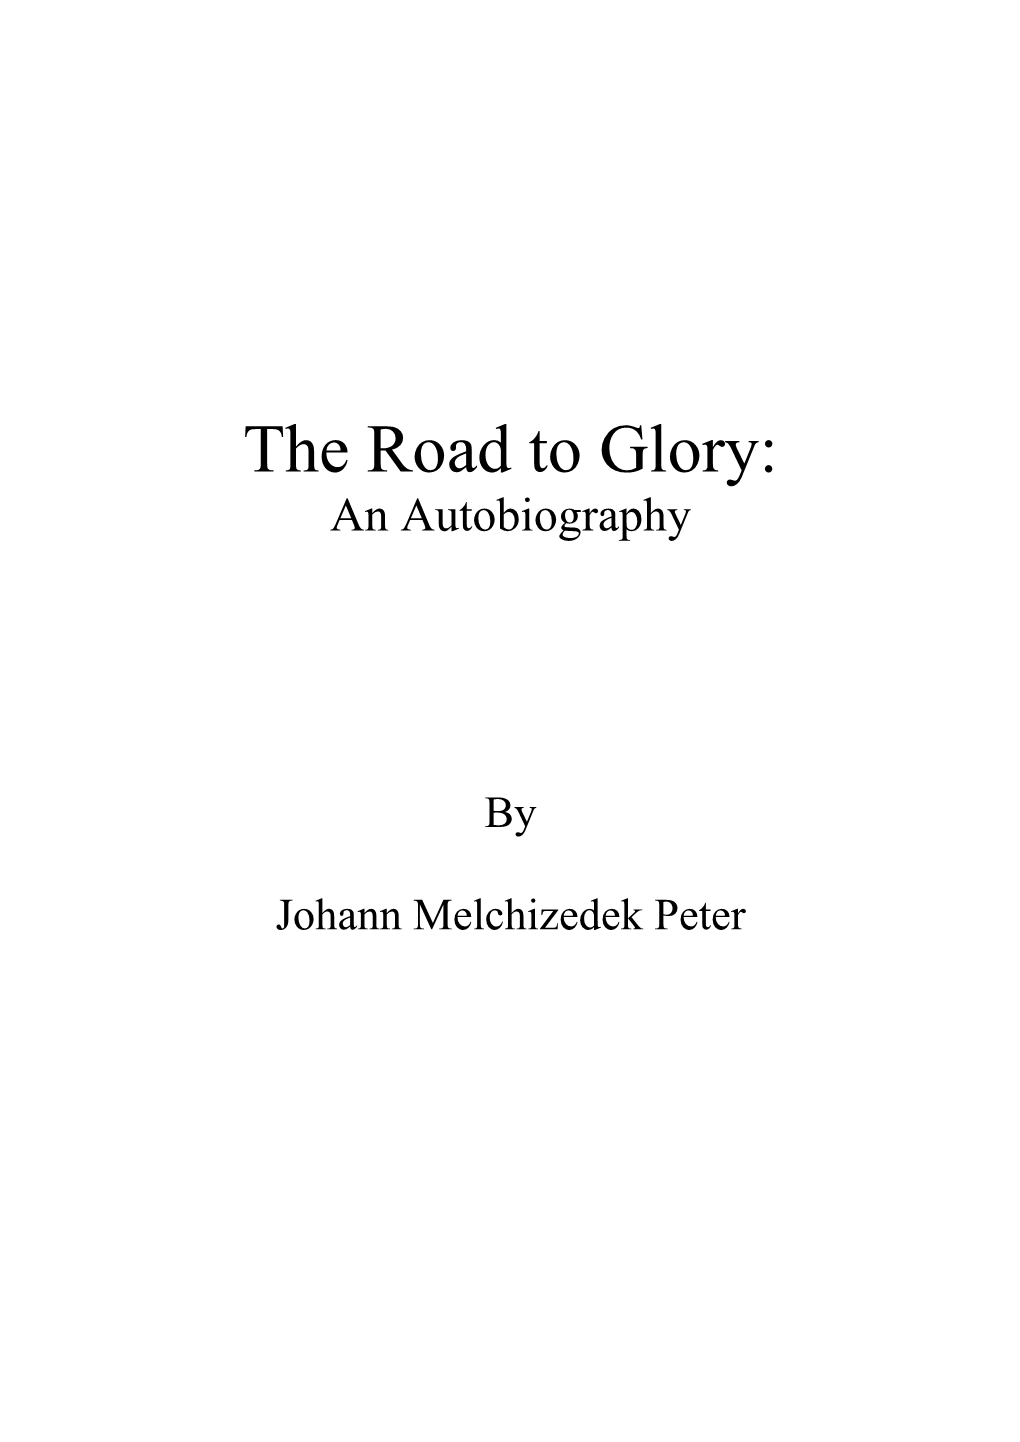 The Road to Glory: an Autobiography of Pastor Peter